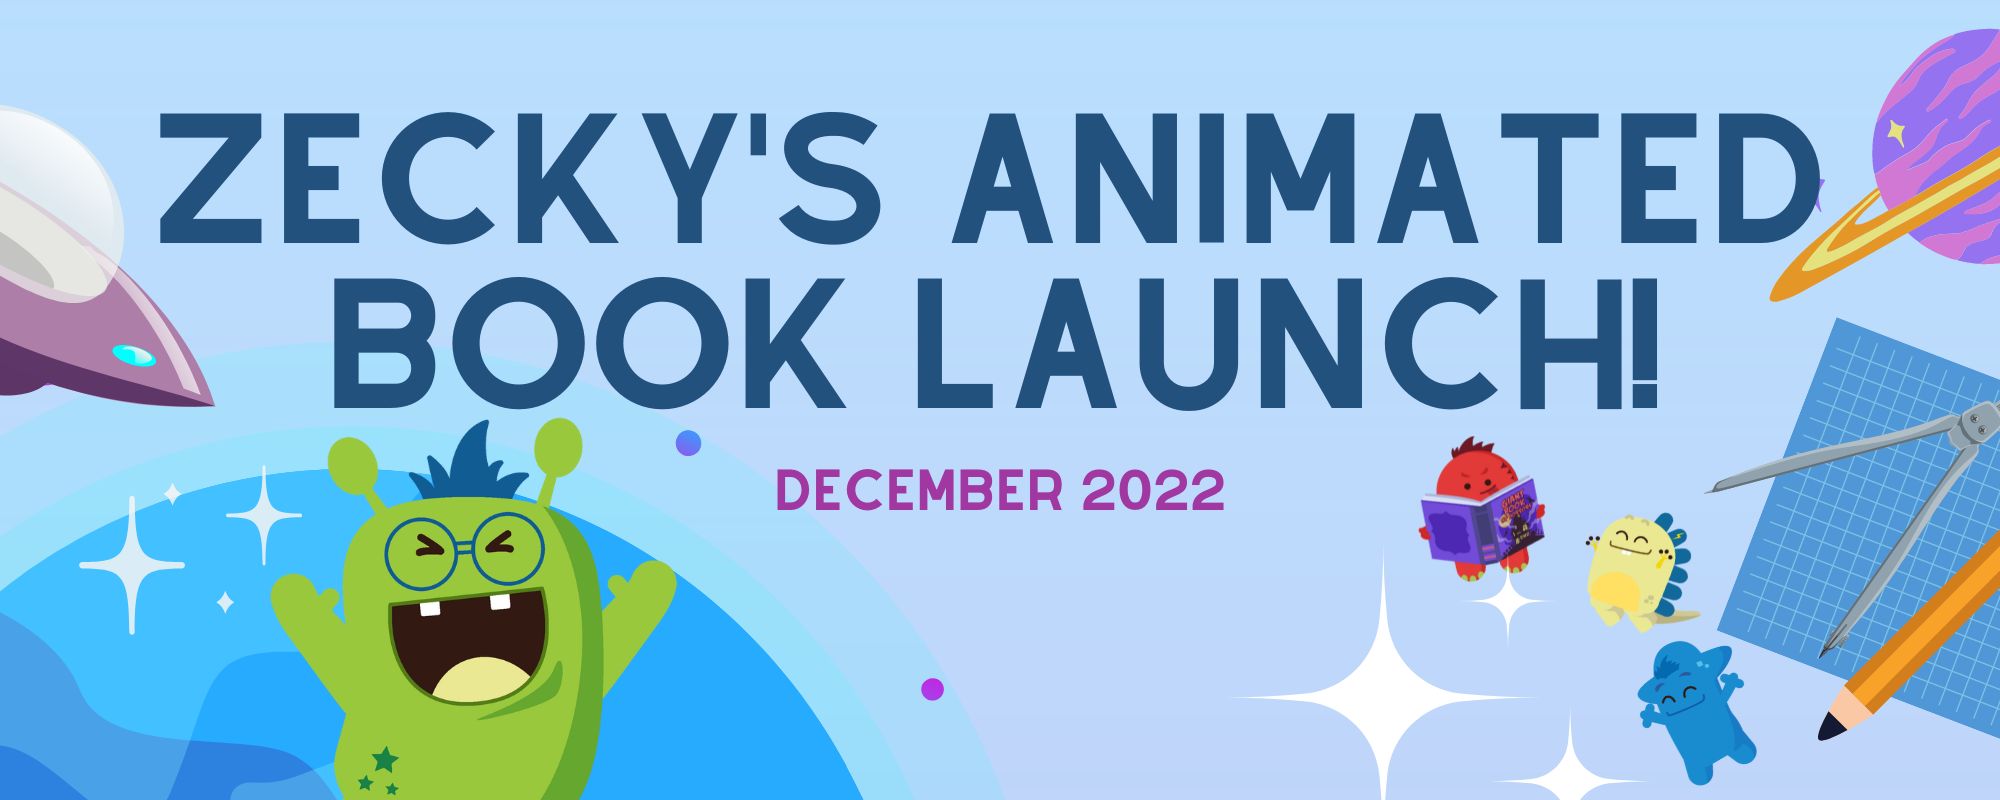 Zecky’s Animated Book Launch